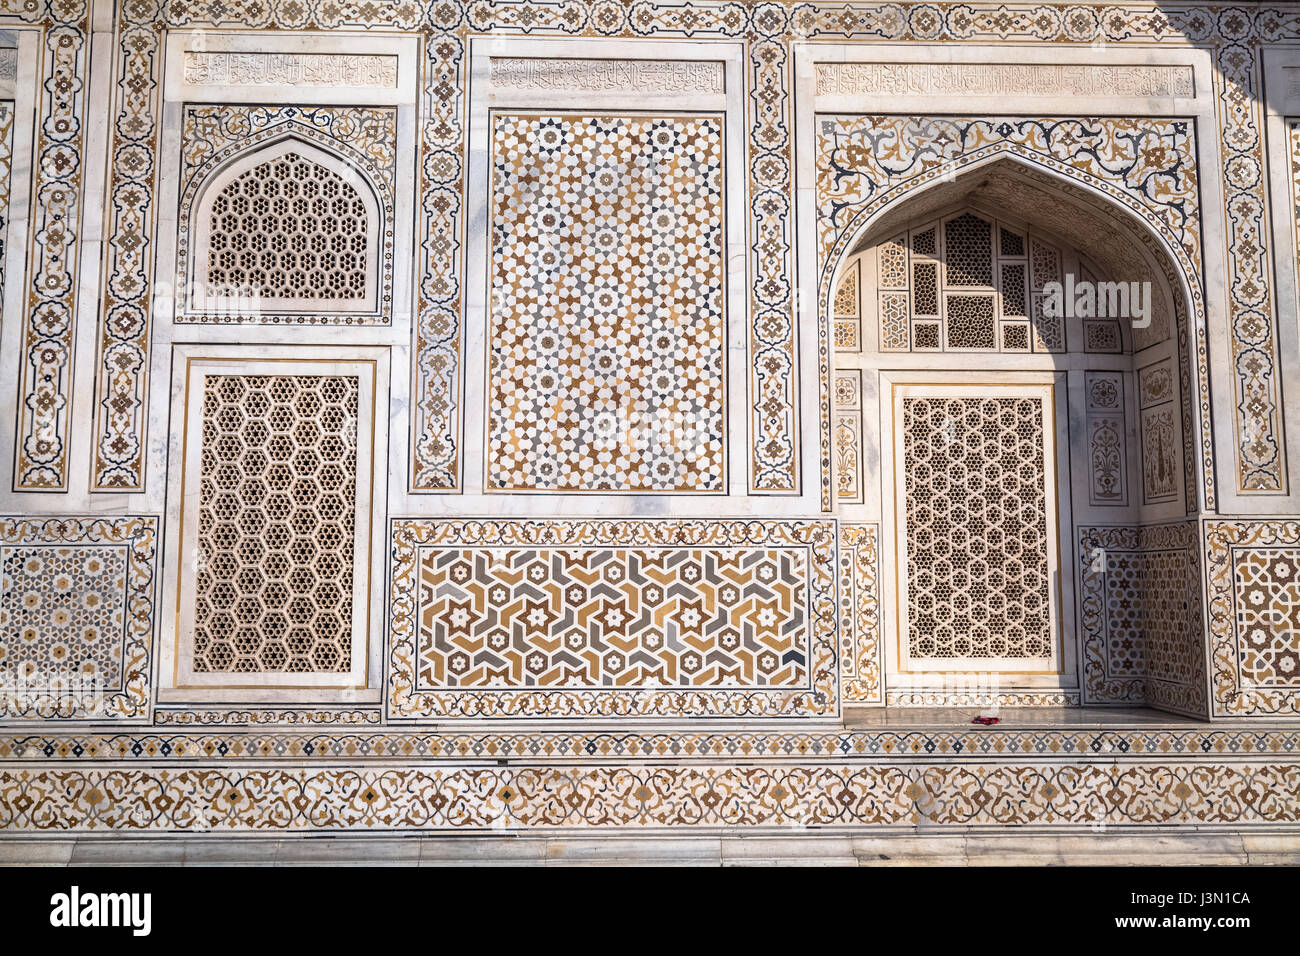 Intricate artwork and marble carvings on the tomb of Itimad-ud-Daulah also known as the Baby Taj in Agra. Stock Photo